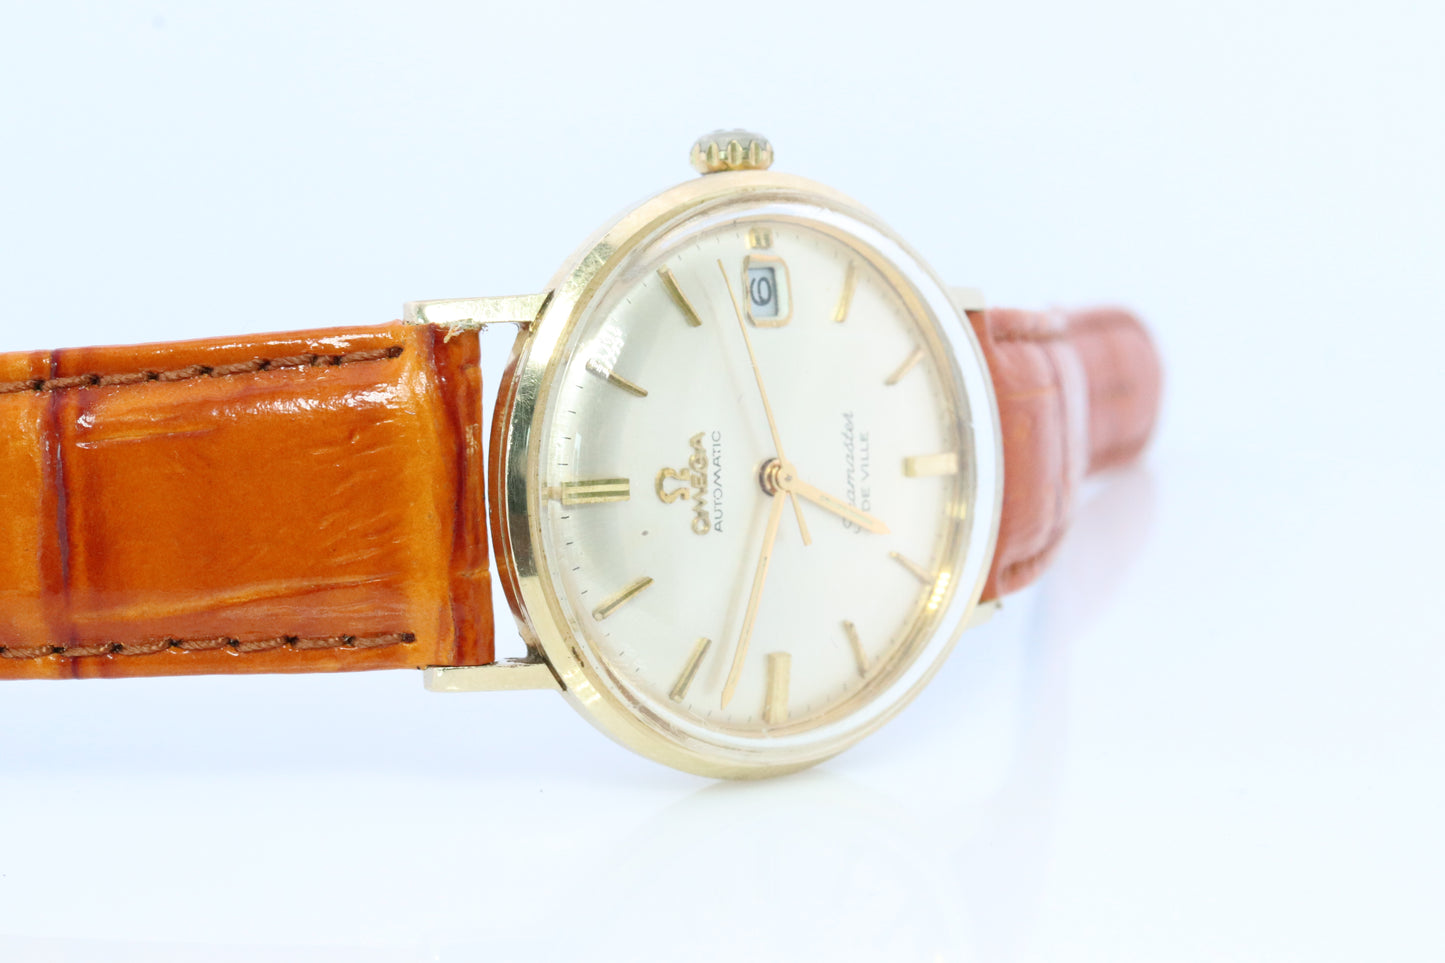 OMEGA Seamaster De Ville. 14k Yellow Gold Omega Automatic SEAMASTER DEVILLE. Mens Gold Watch. Date. (st368)